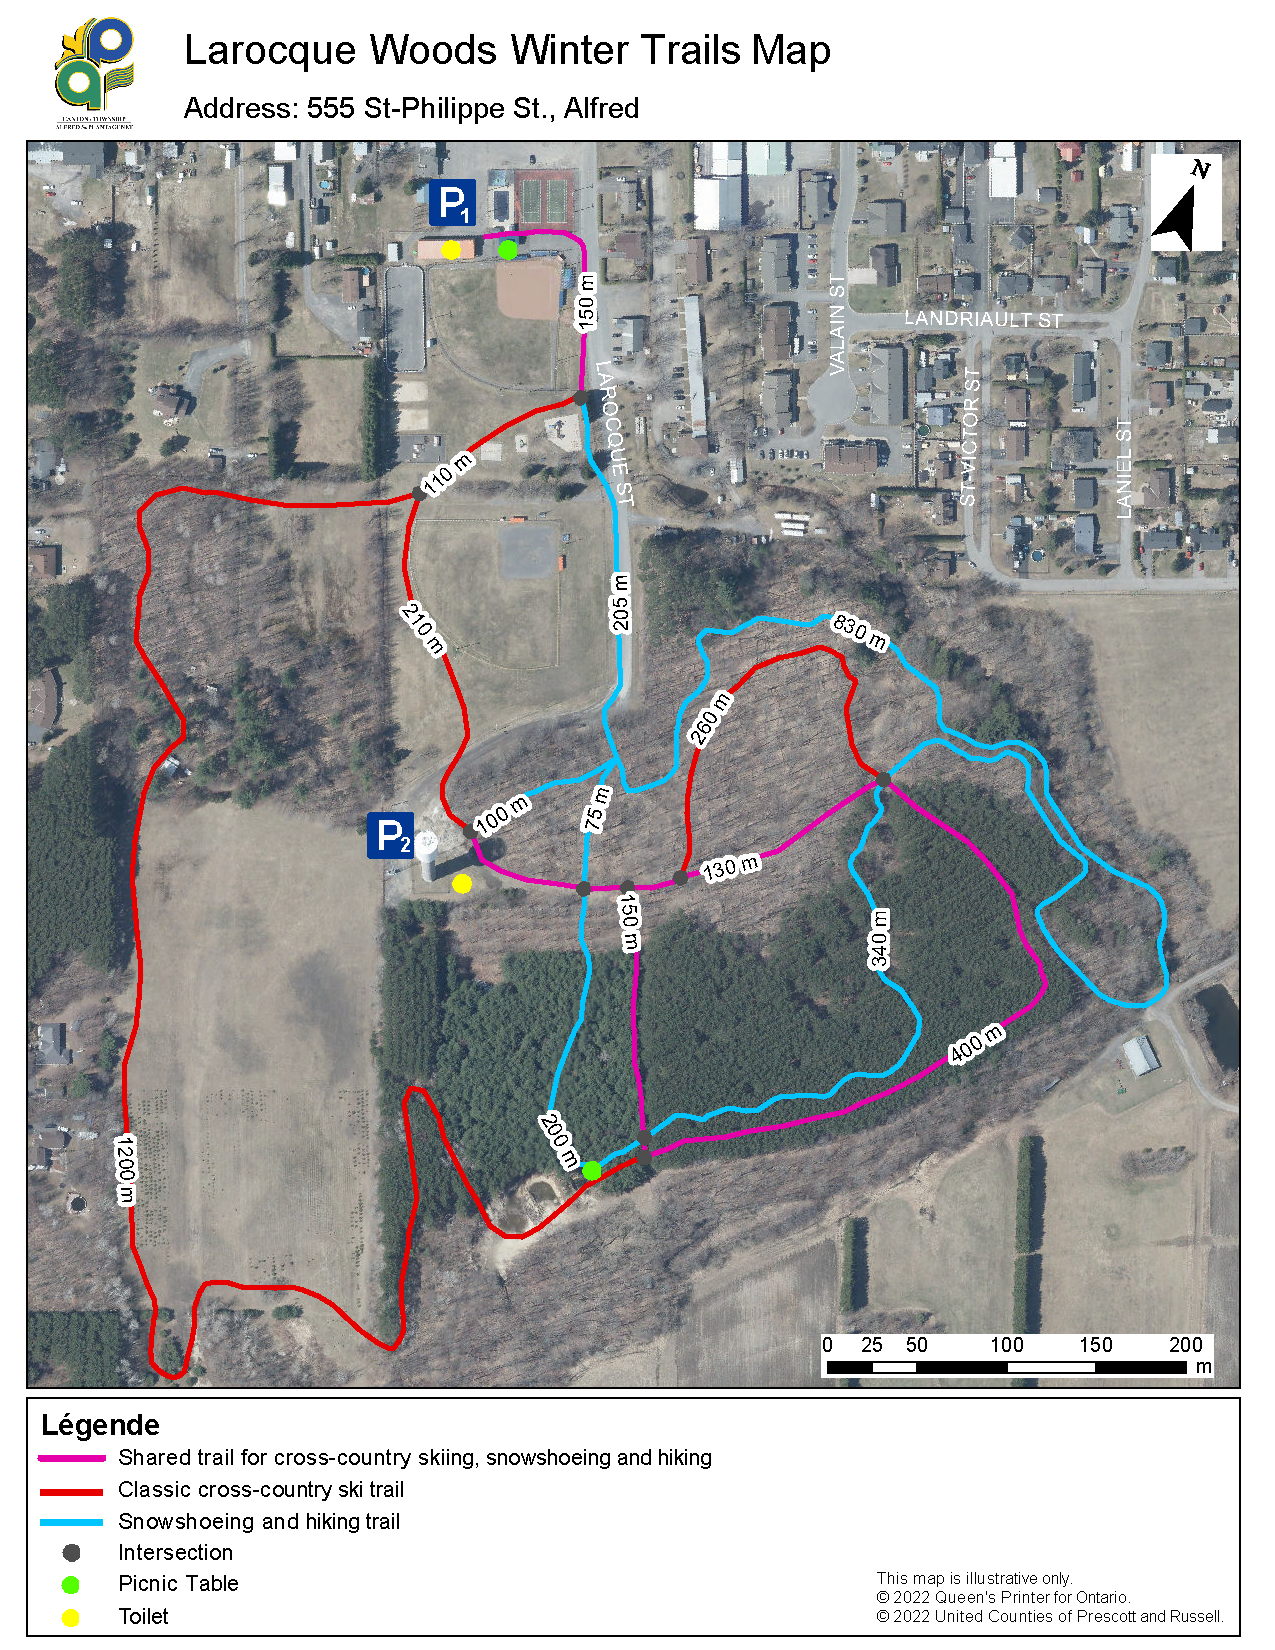 Map of the Larocque Woods winter trails